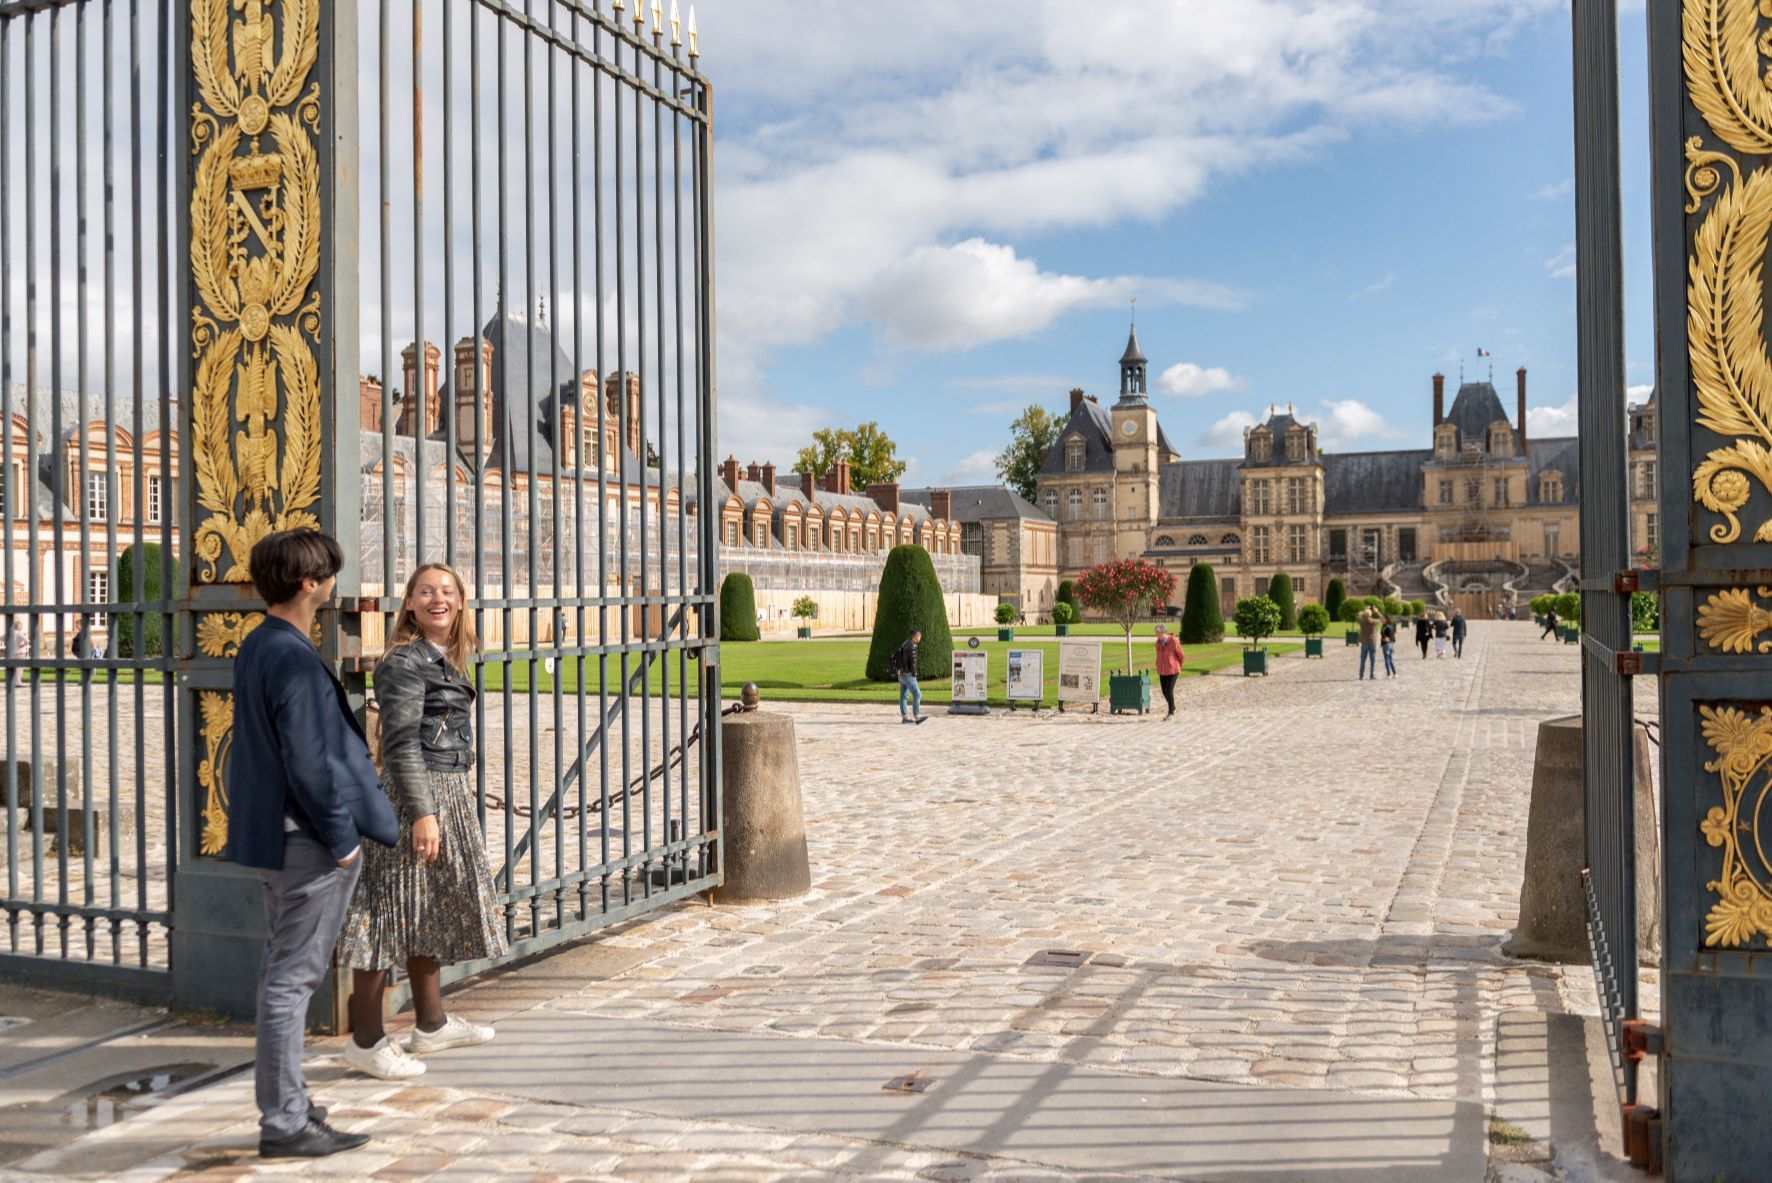 All day trip audio tour of Fontainebleau and Vaux le Vicomte, with transport from Paris